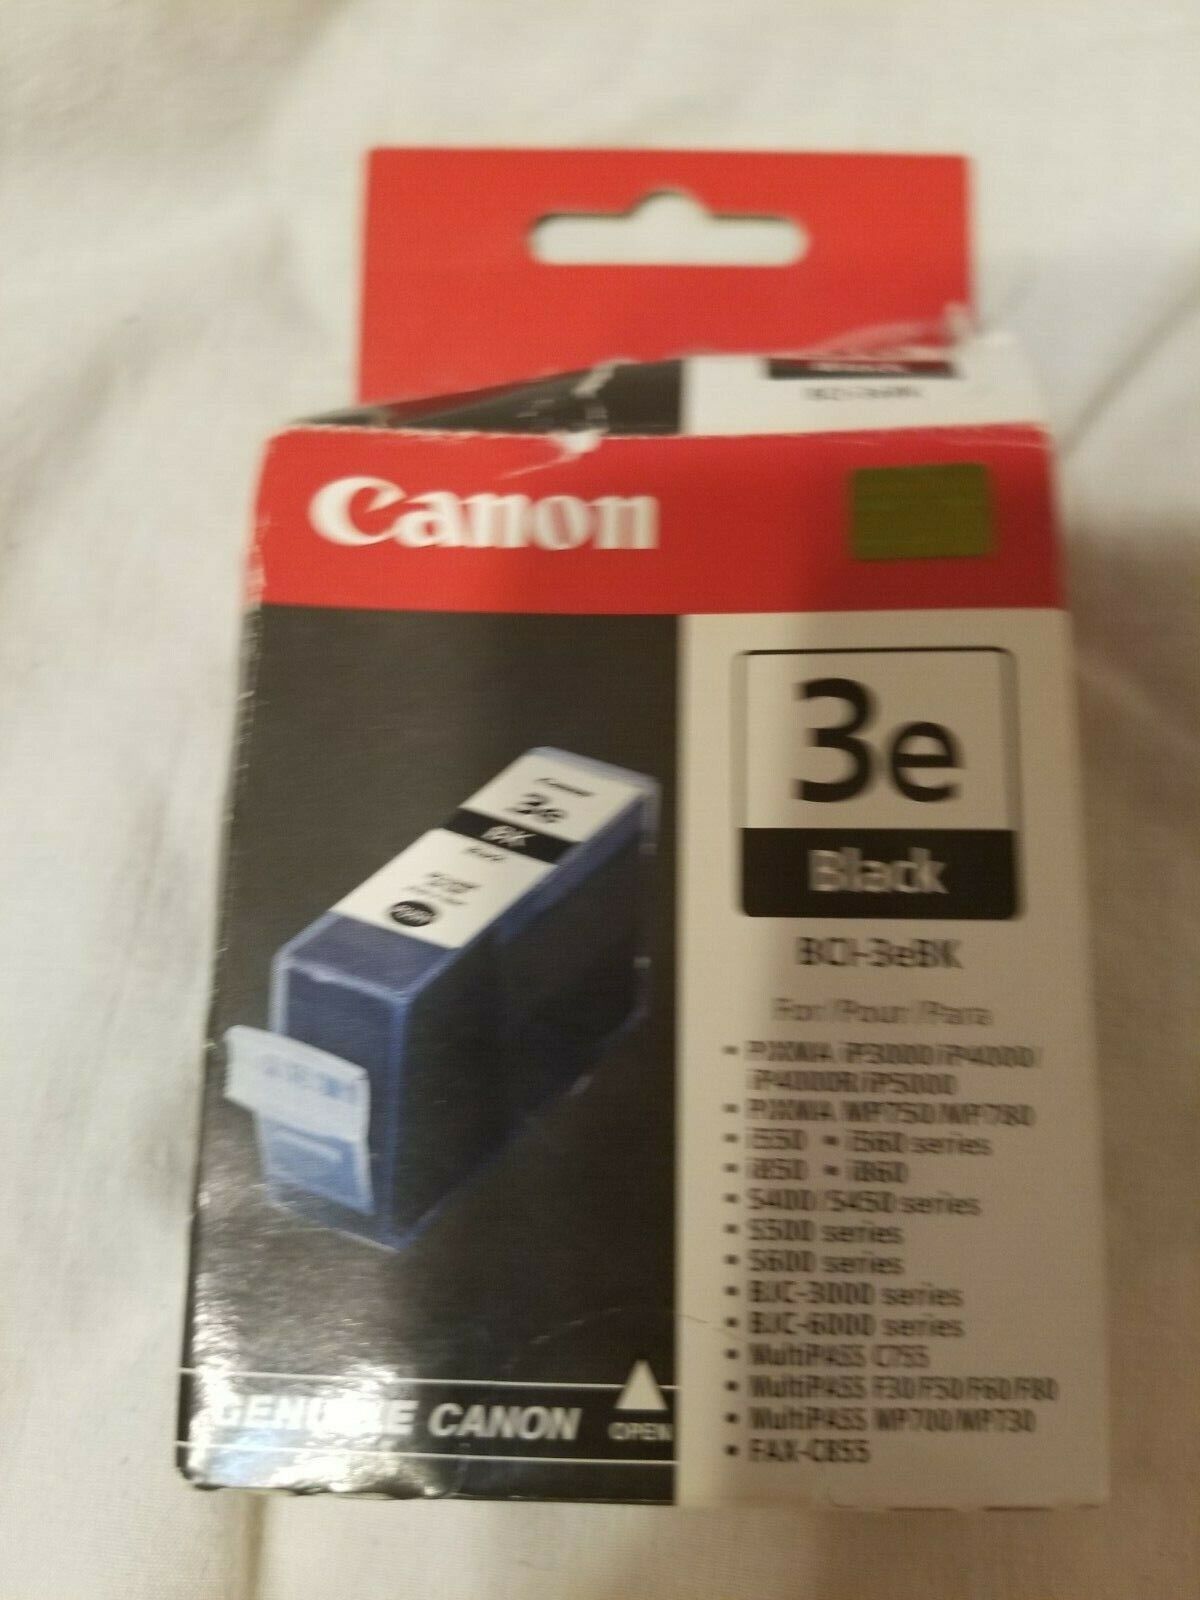 Canon 3 e Black BCI 3eBK ink 1 cartridge sealed no exp date listed